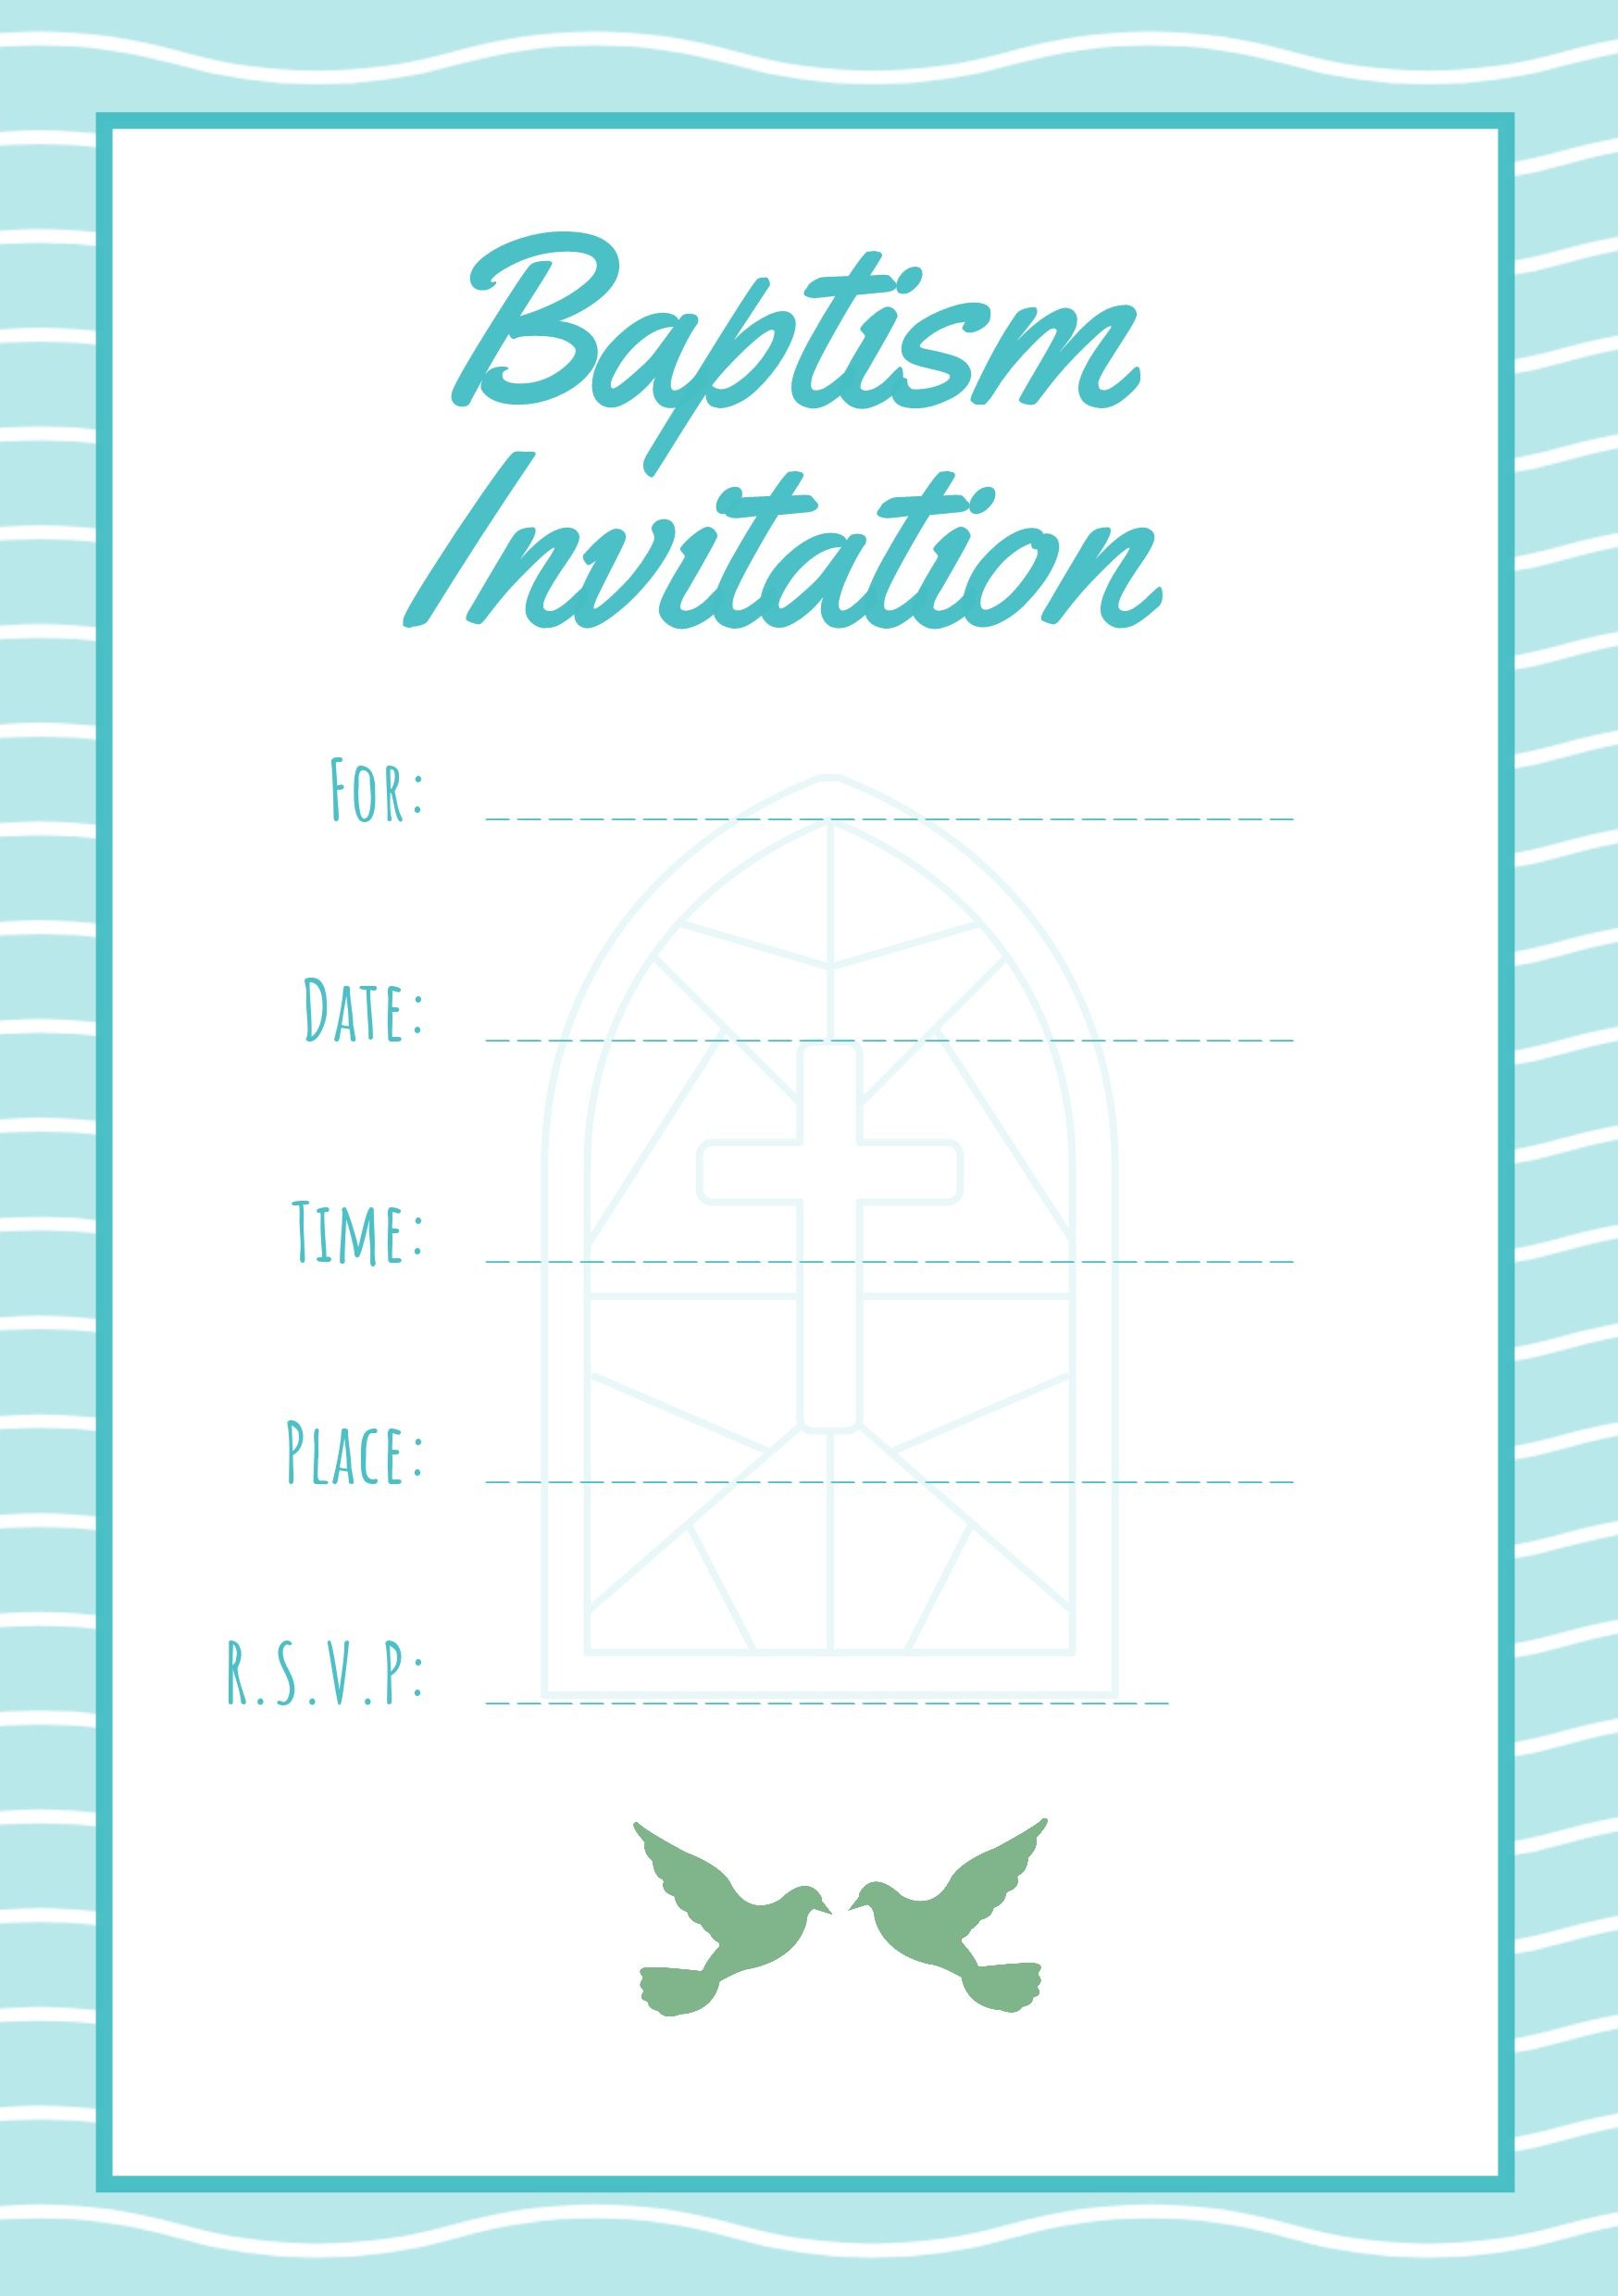 Blue and White Baptism invitation with script text and religious icons - The complete guide to fonts: 5 essential types of fonts in typography - Image